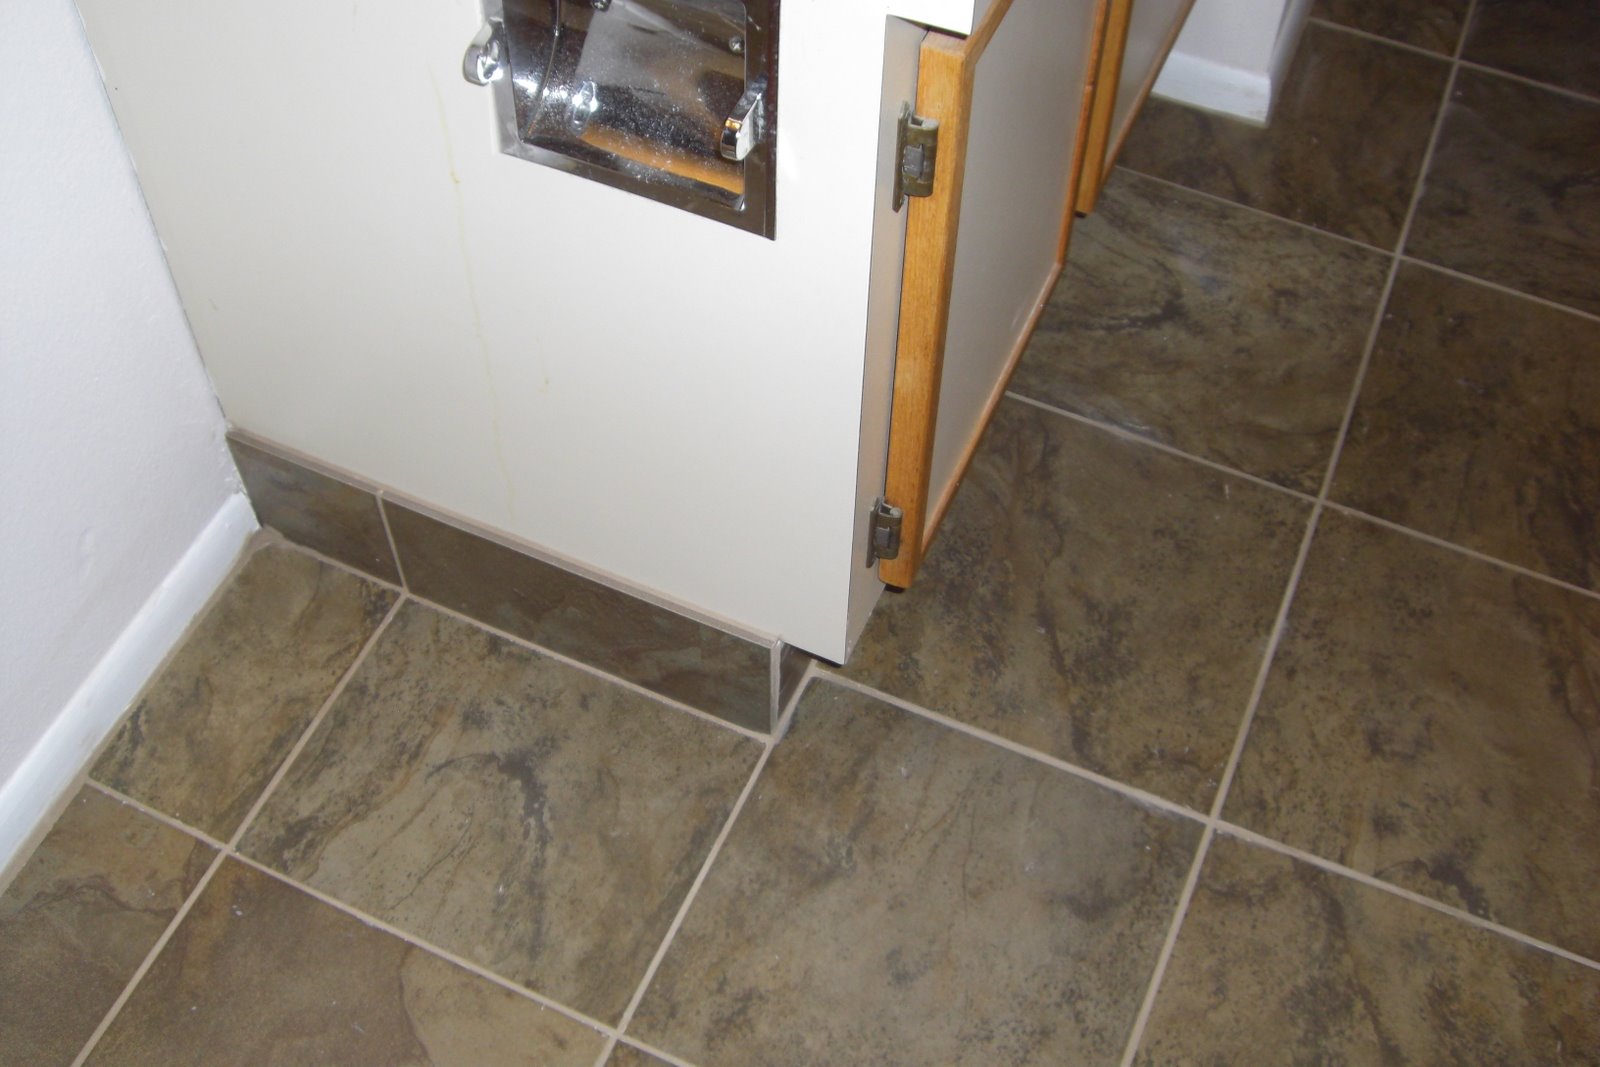 [B+grout+side+of+cabinet.JPG]